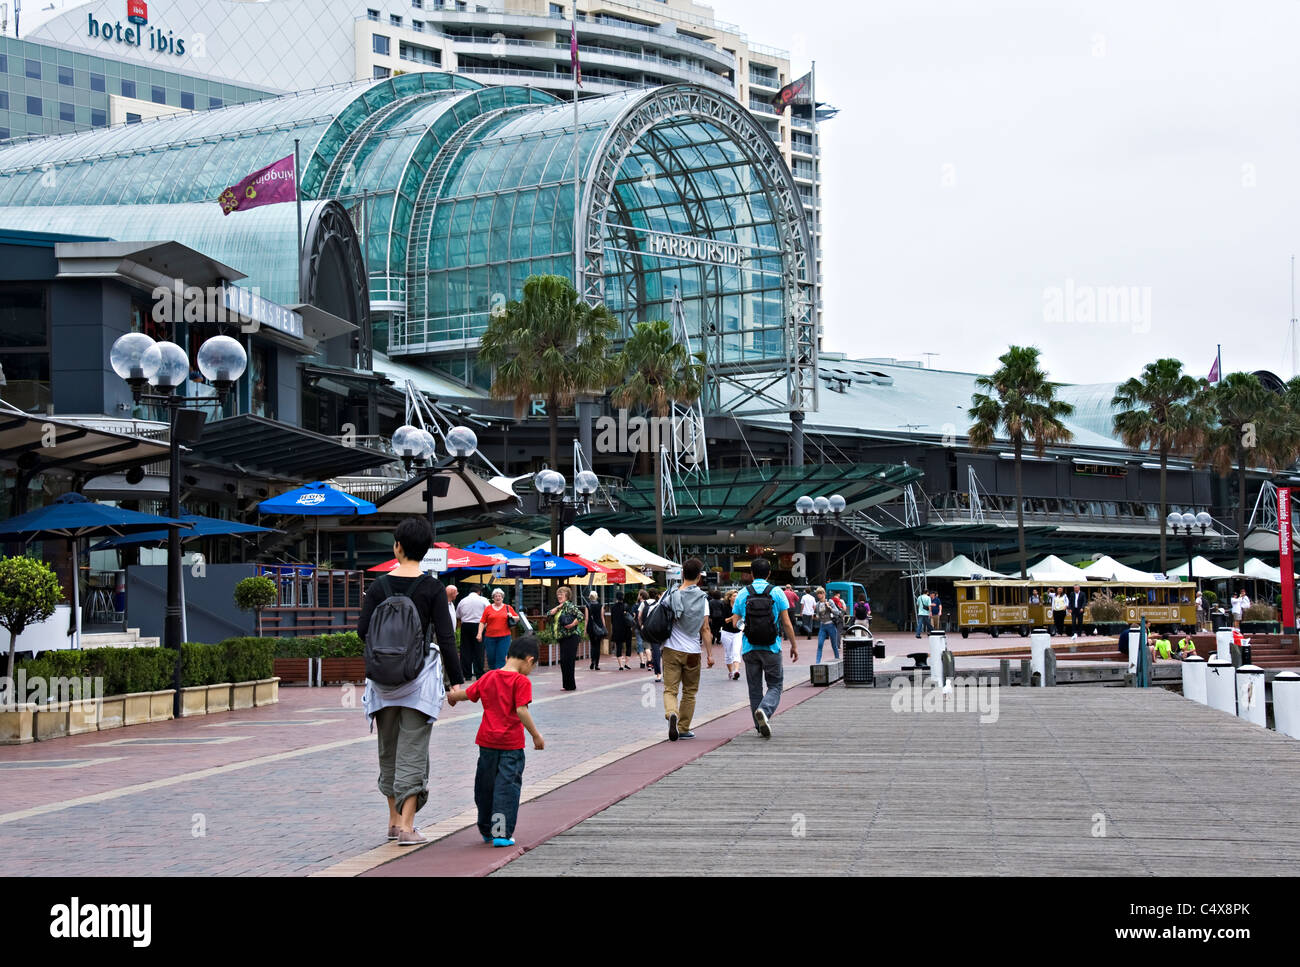 Harbourside Promenade Entrance and Large Paved Forecourt with Tourist Train at Darling Harbour Sydney New South Wales Australia Stock Photo